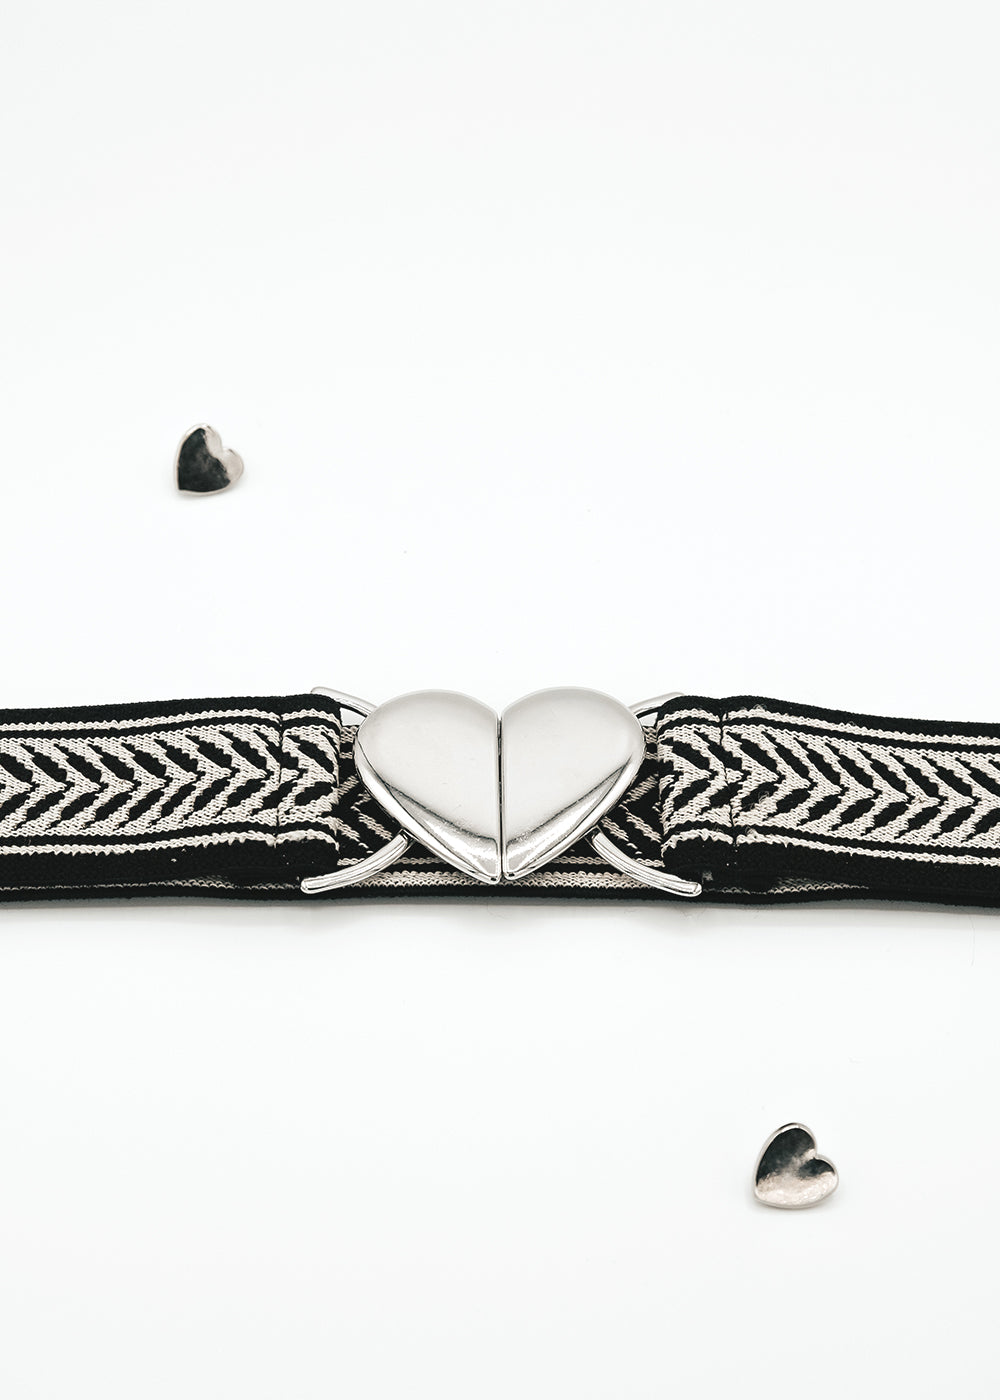 Big Love belt with a silver buckle